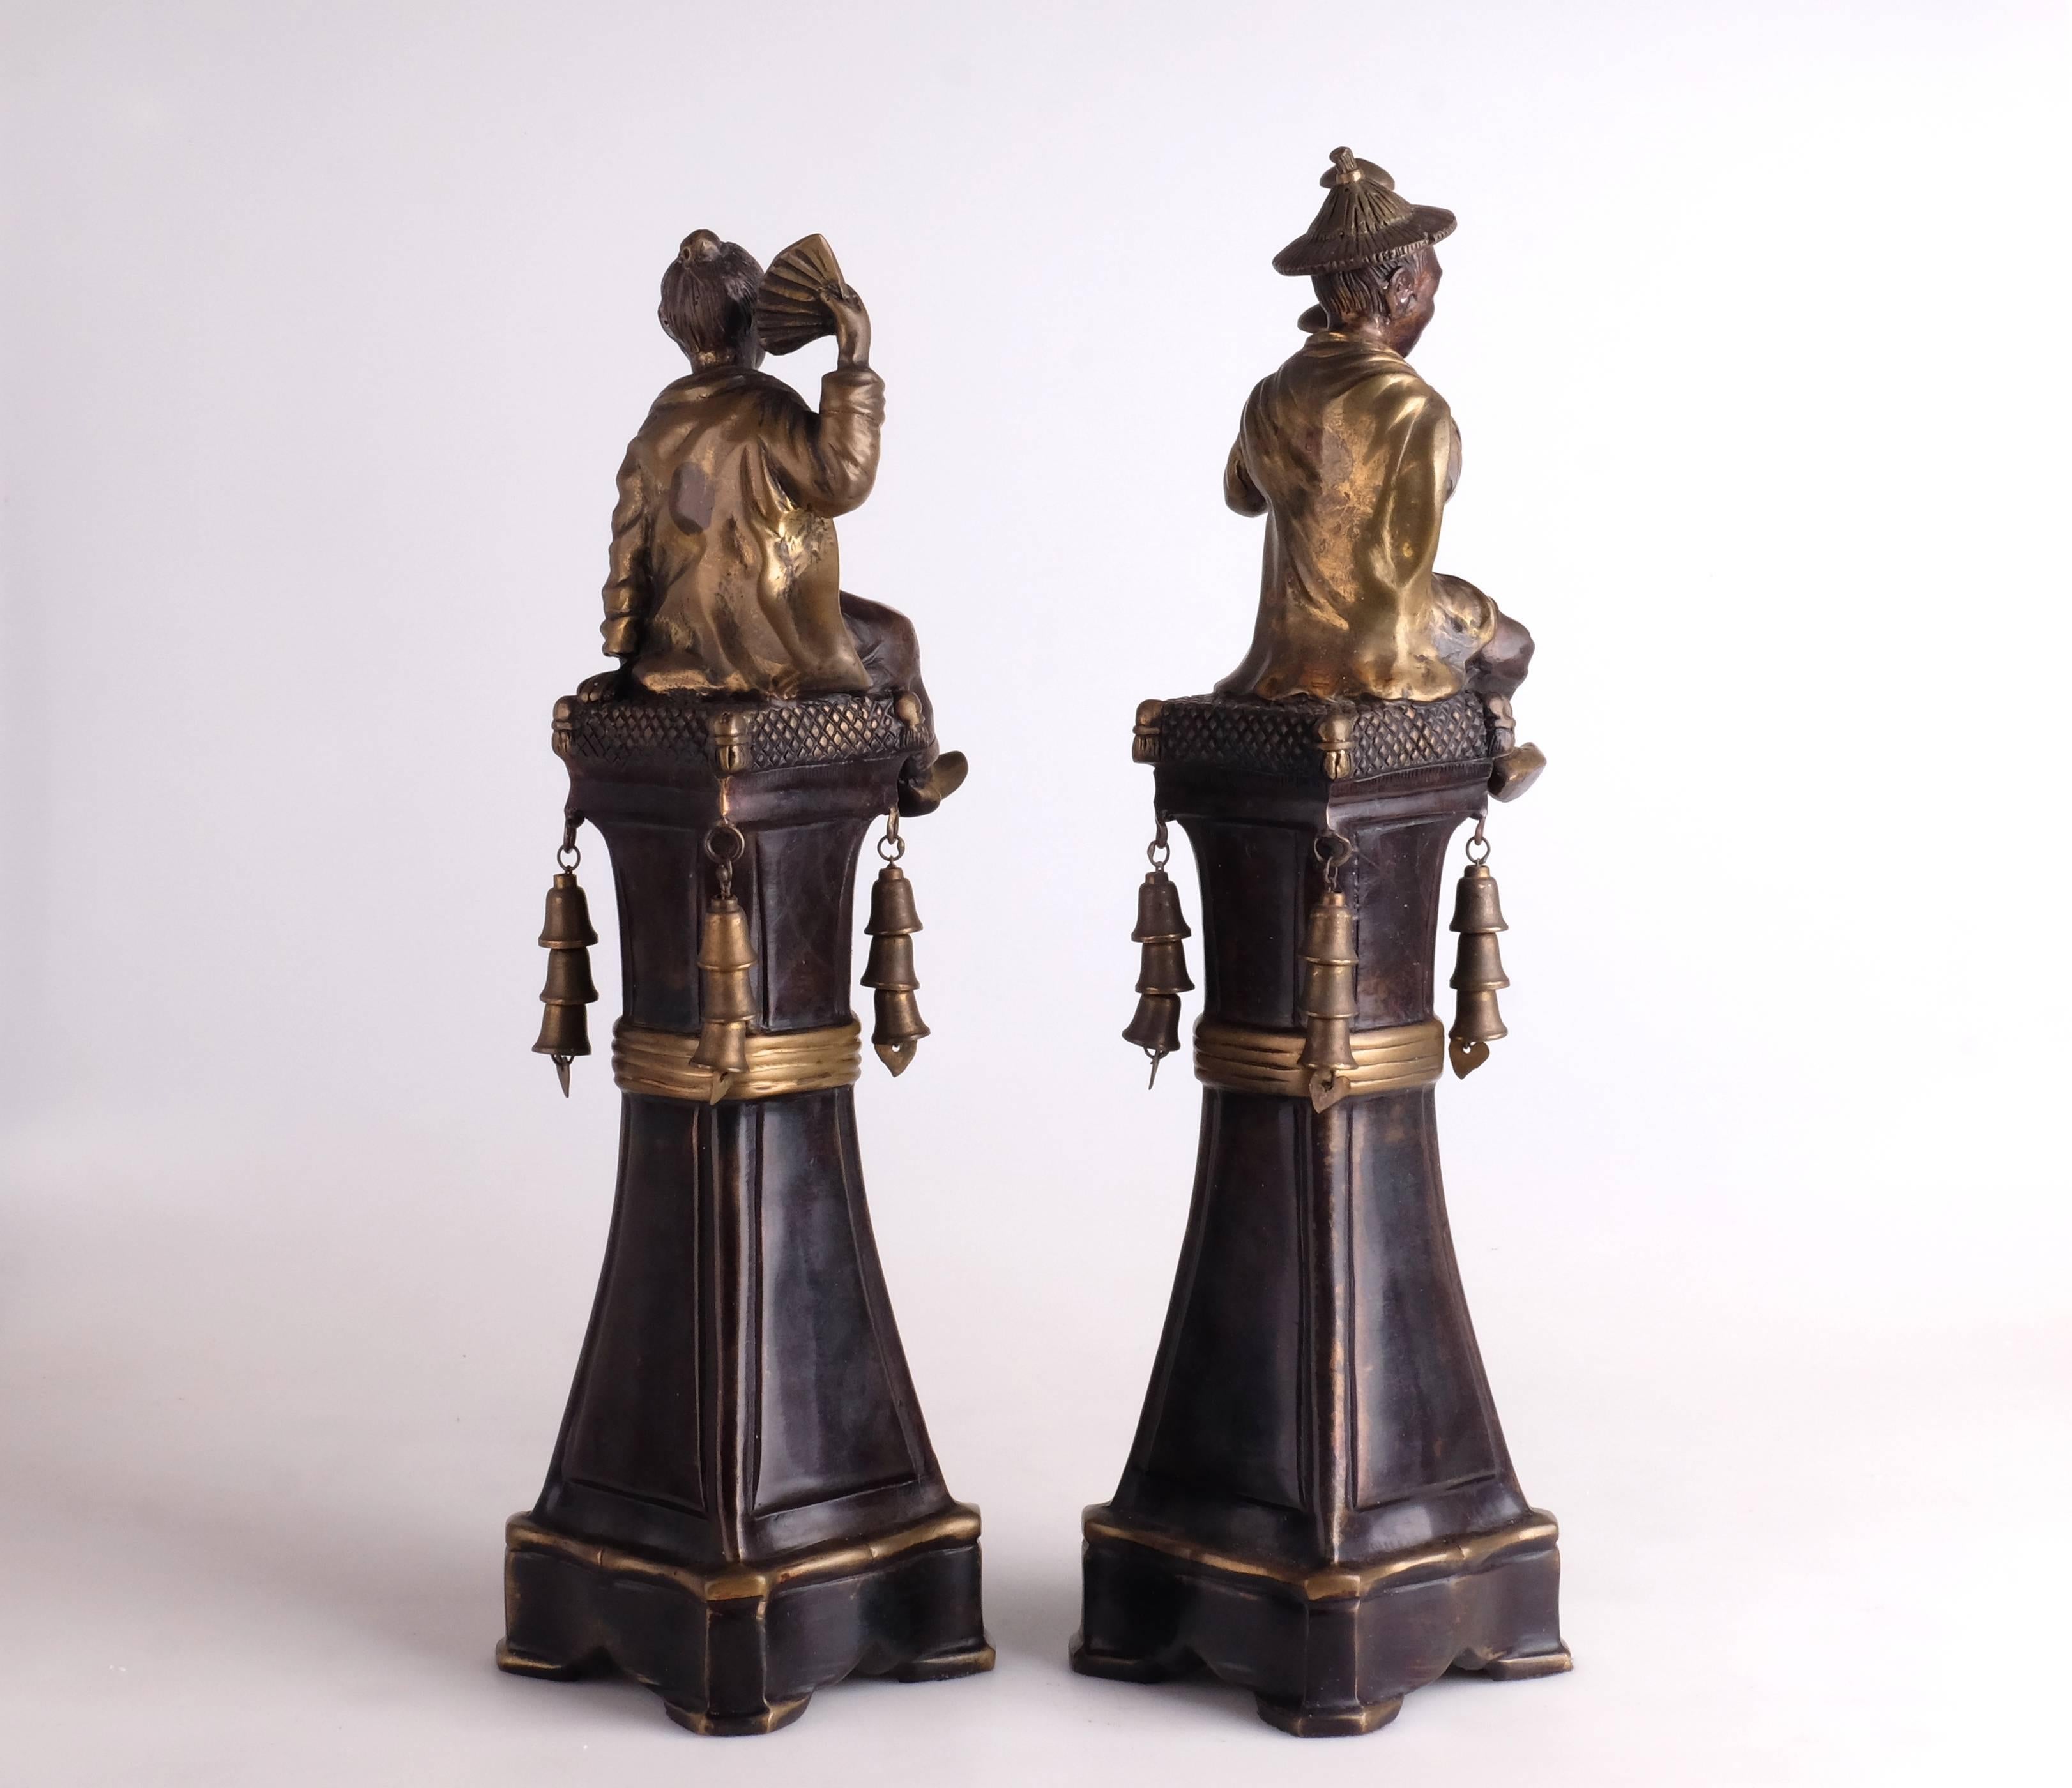 Hand-Crafted Pair of Chinese Figures in Bronze from the 1940s, Italy